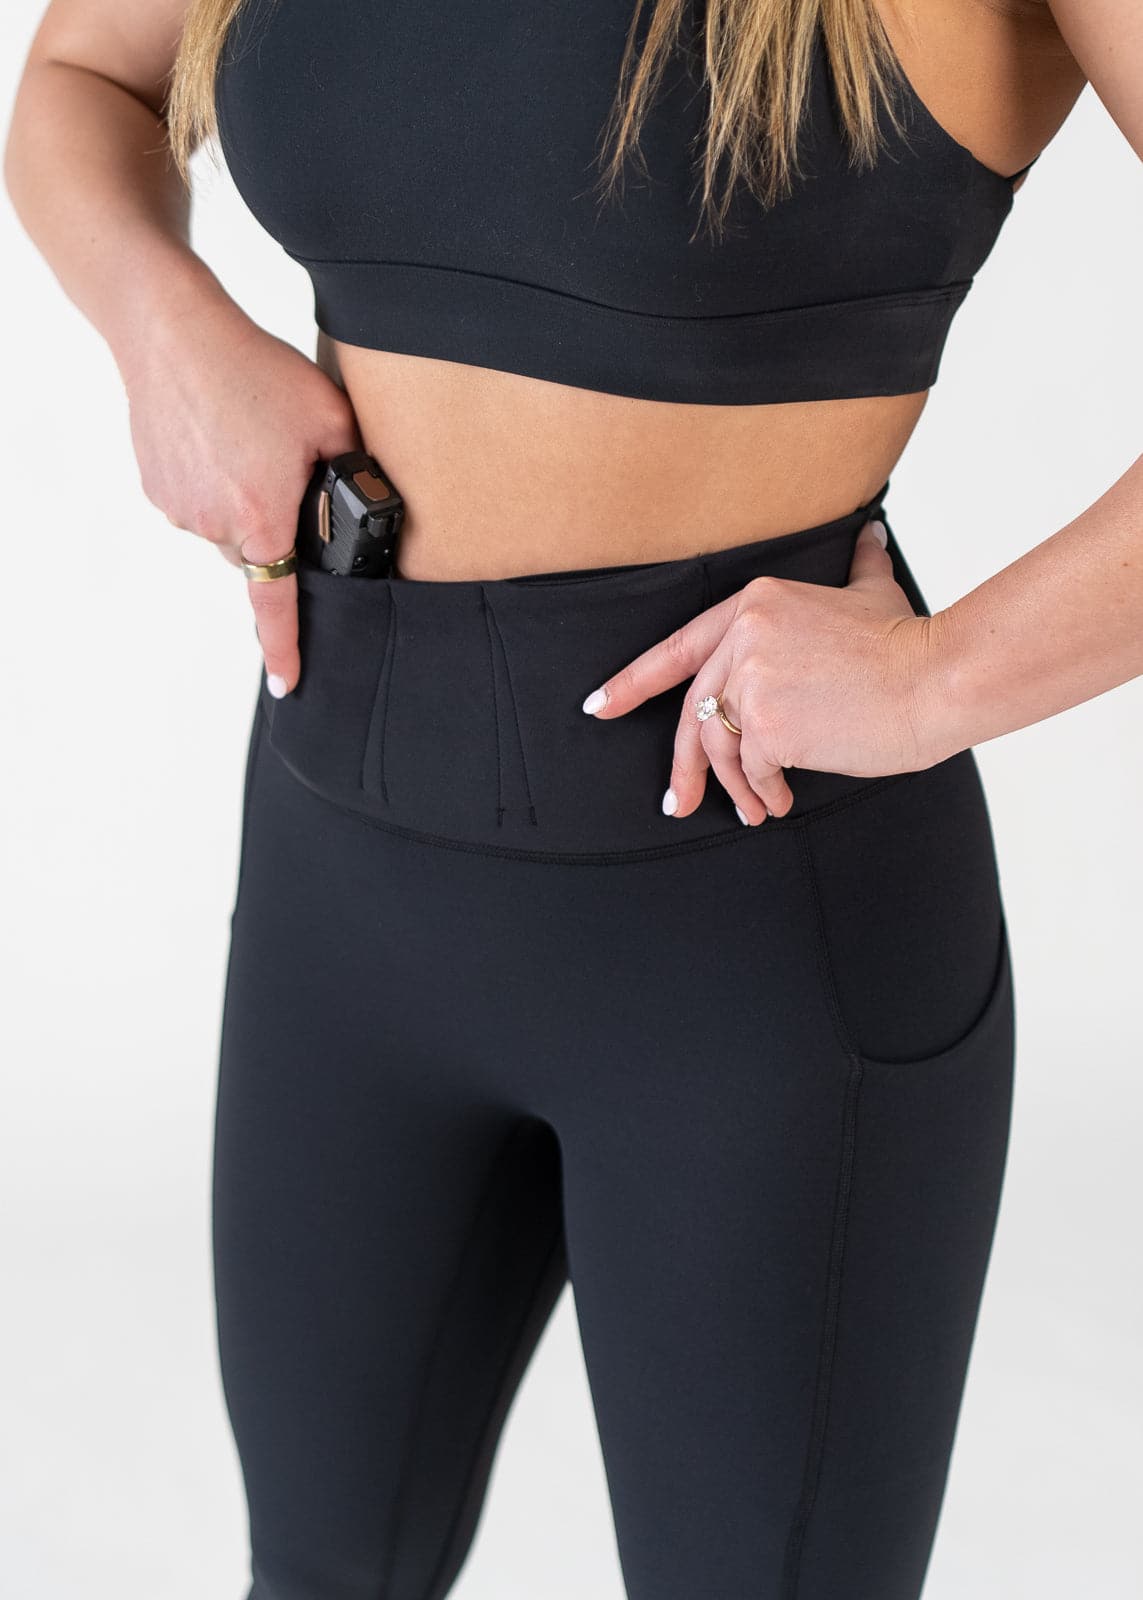 Concealed Carry Leggings With Built-in Band 3/4 Front View Close Up with Hands on Hips | Black